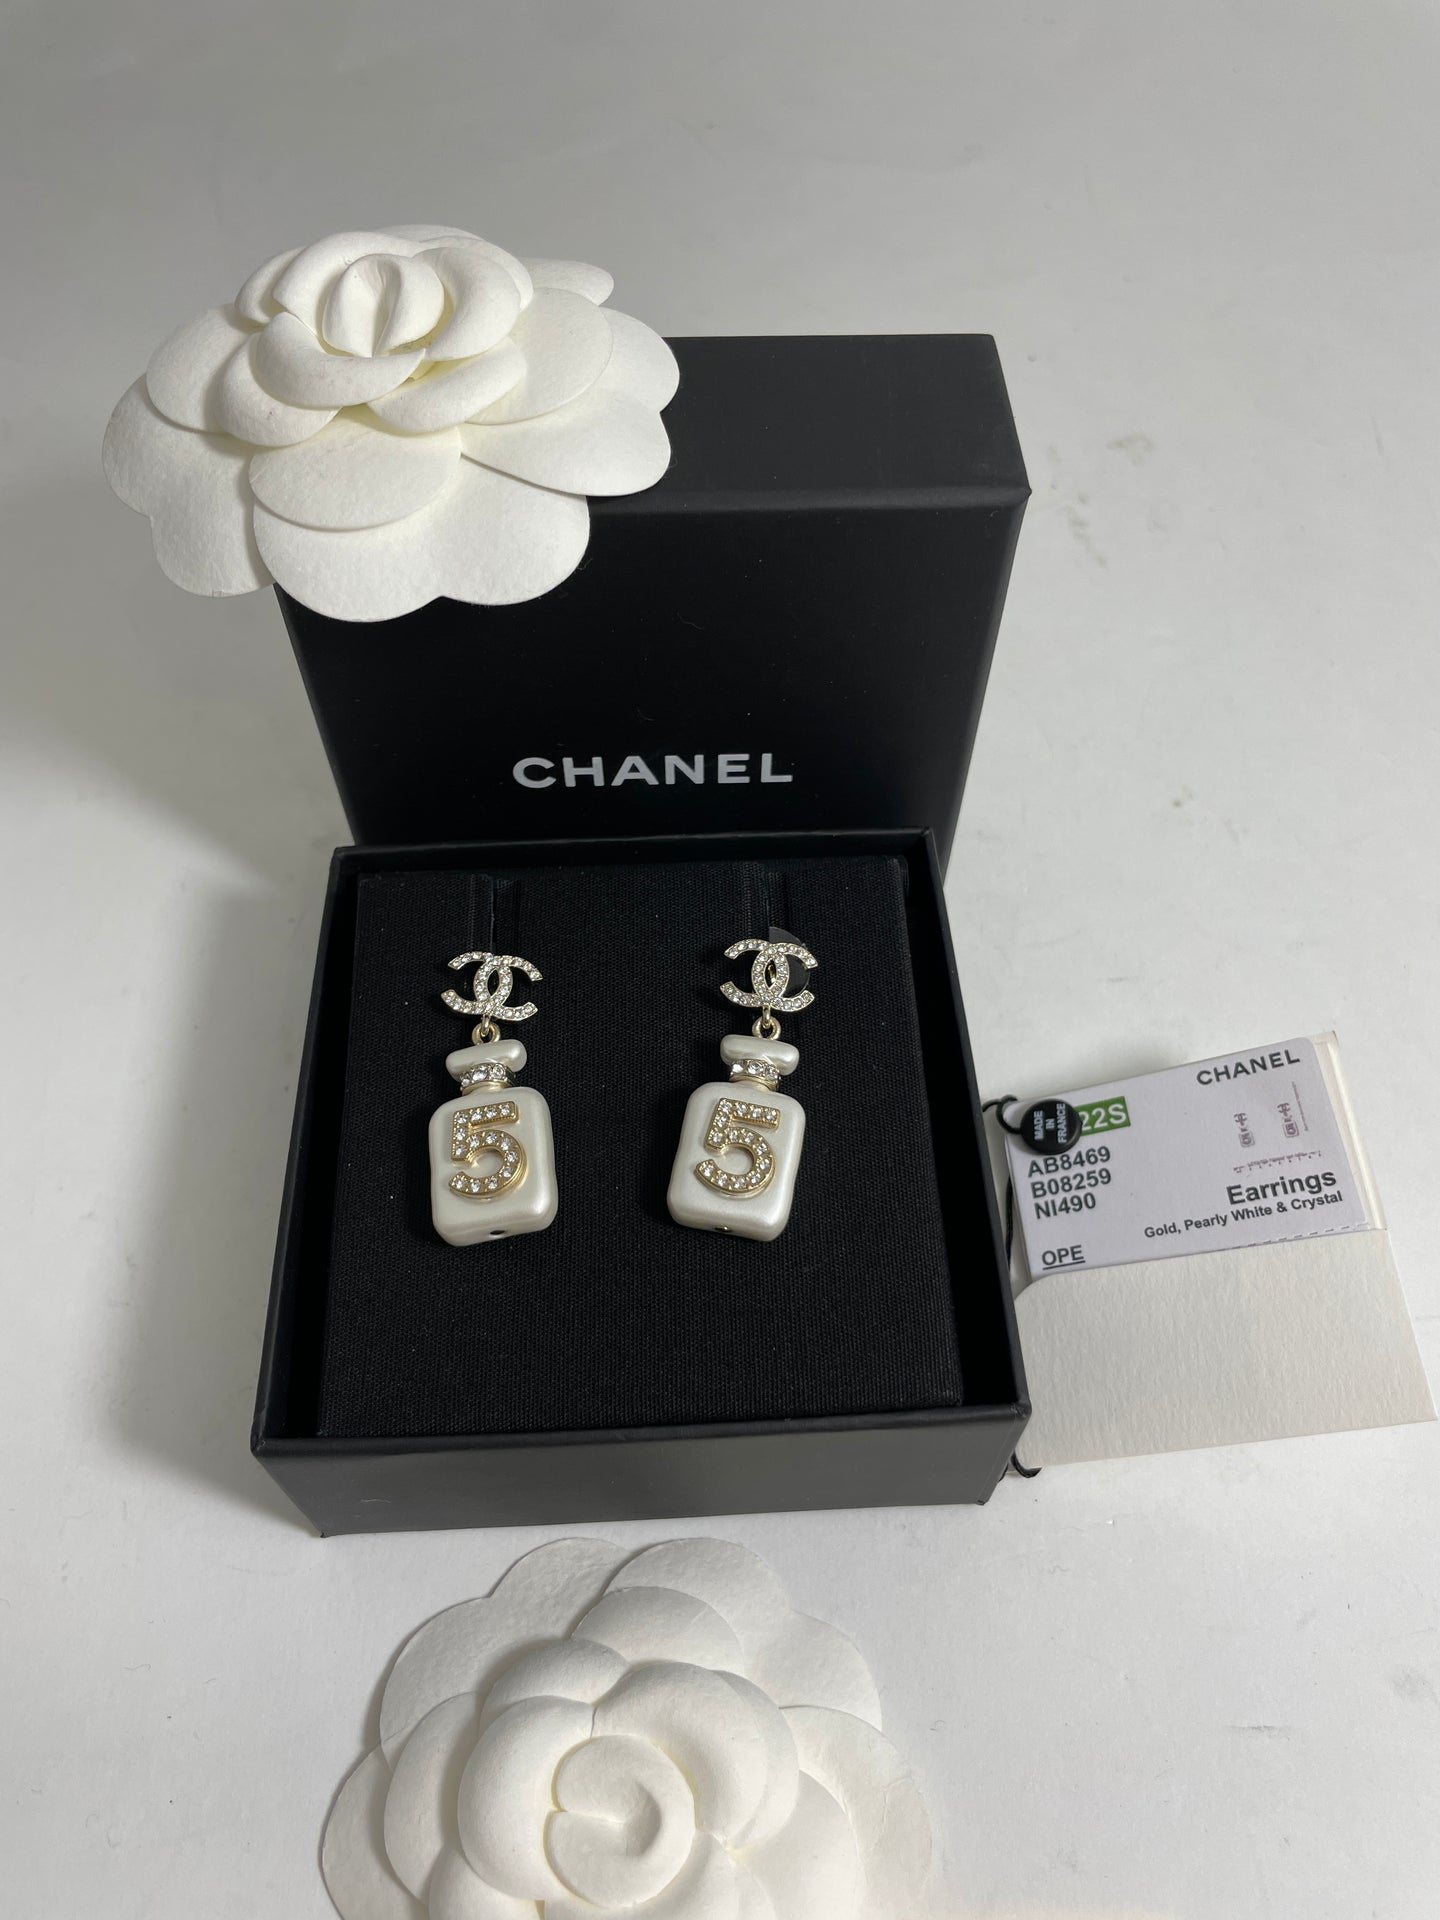 Chanel 22 CC Pearly White Gold Tone Perfume Bottle Drop Earrings